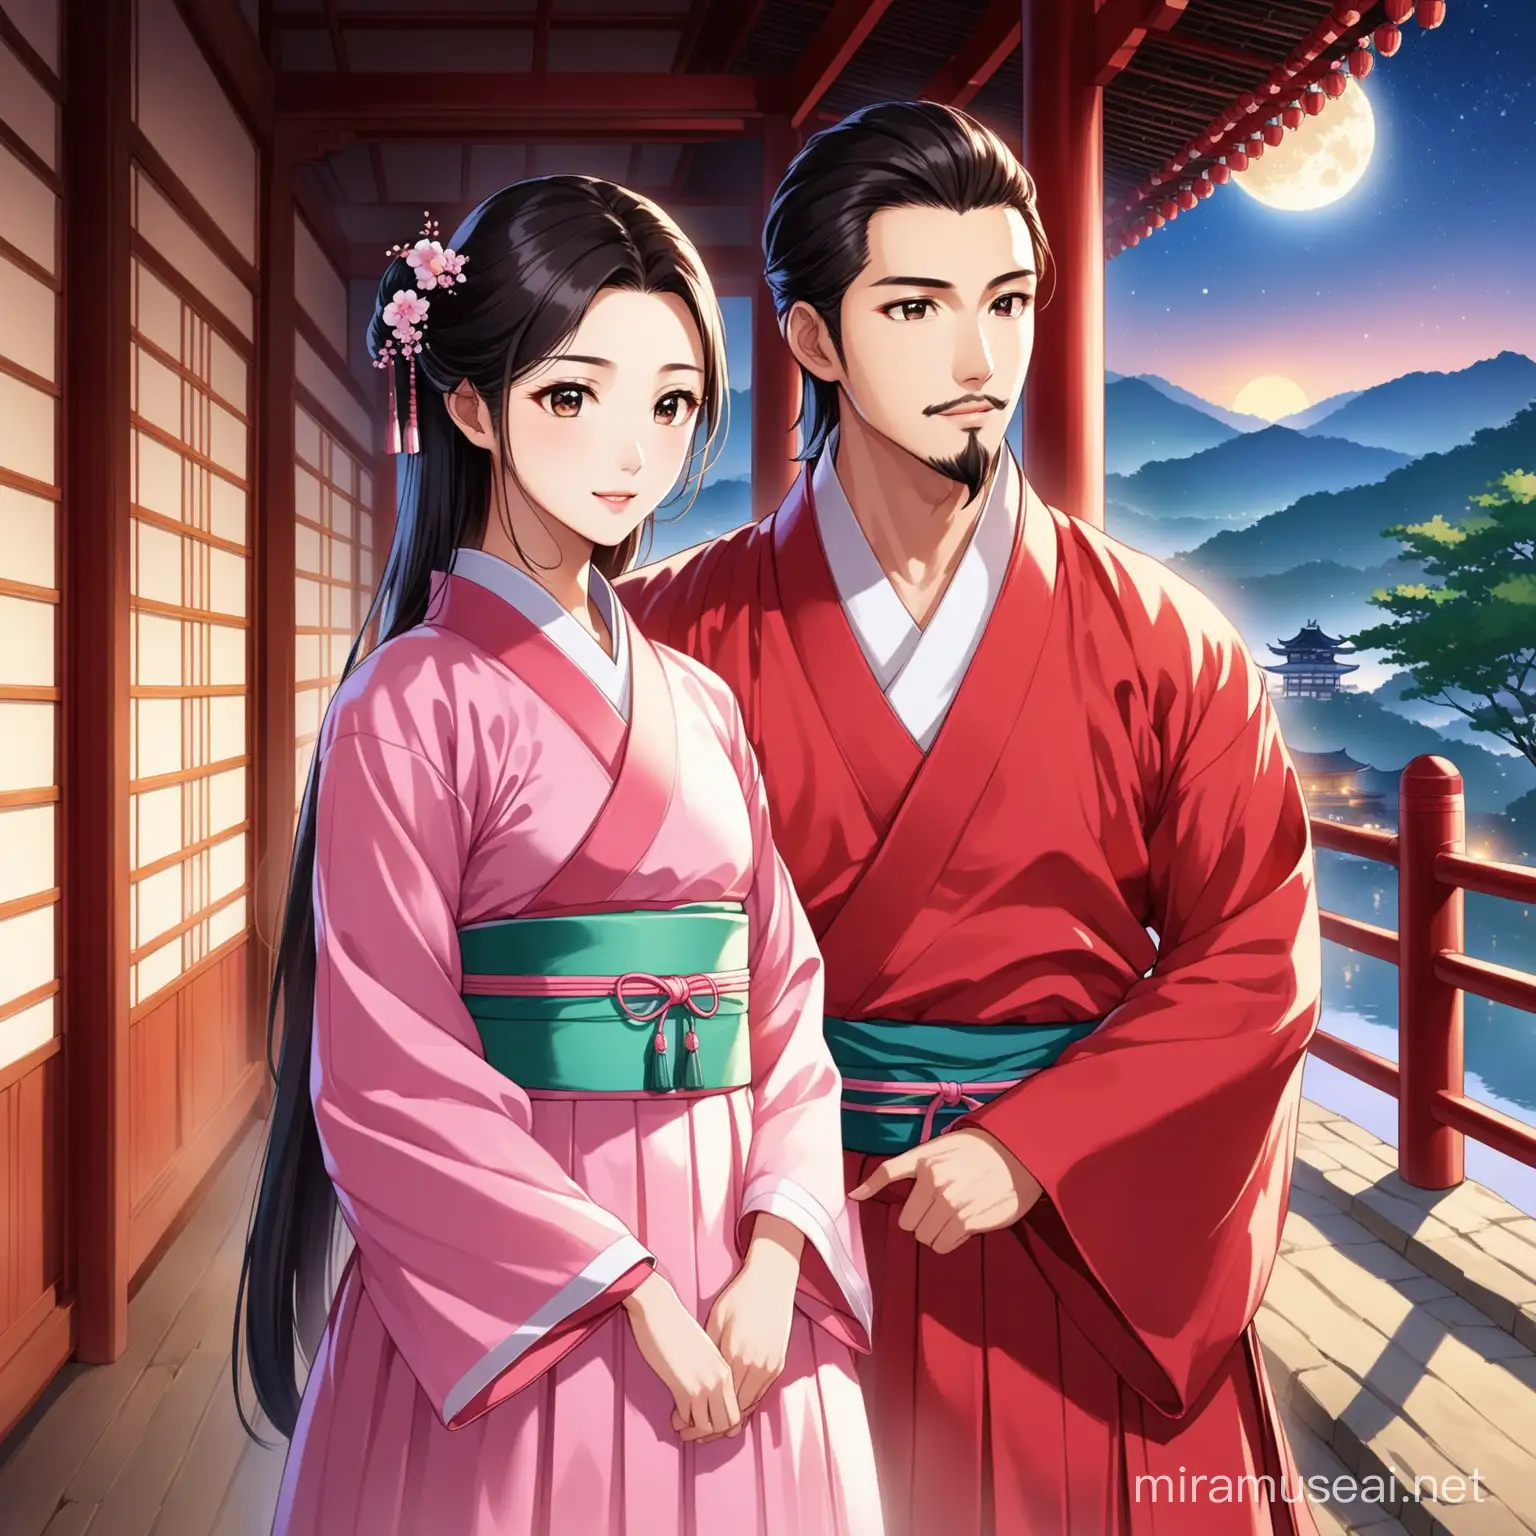 the Chosun Dynasty era

The moon rises in the middle of the night

the background of the pavilion

Handsome doesn't have a beard

The handsome man's clothes are red hanbok

Beauty's clothes are pink hanbok

The two are Asians in their early 20s

a romantic atmosphere